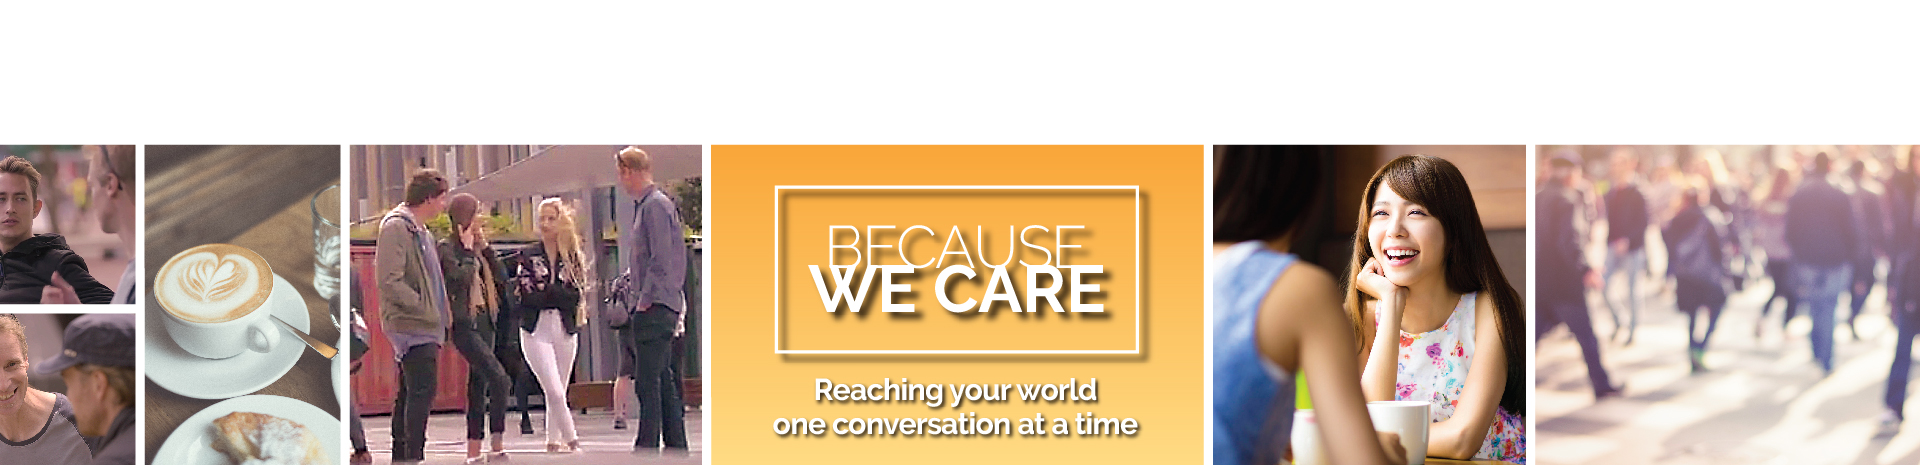 Because we care - Video Series